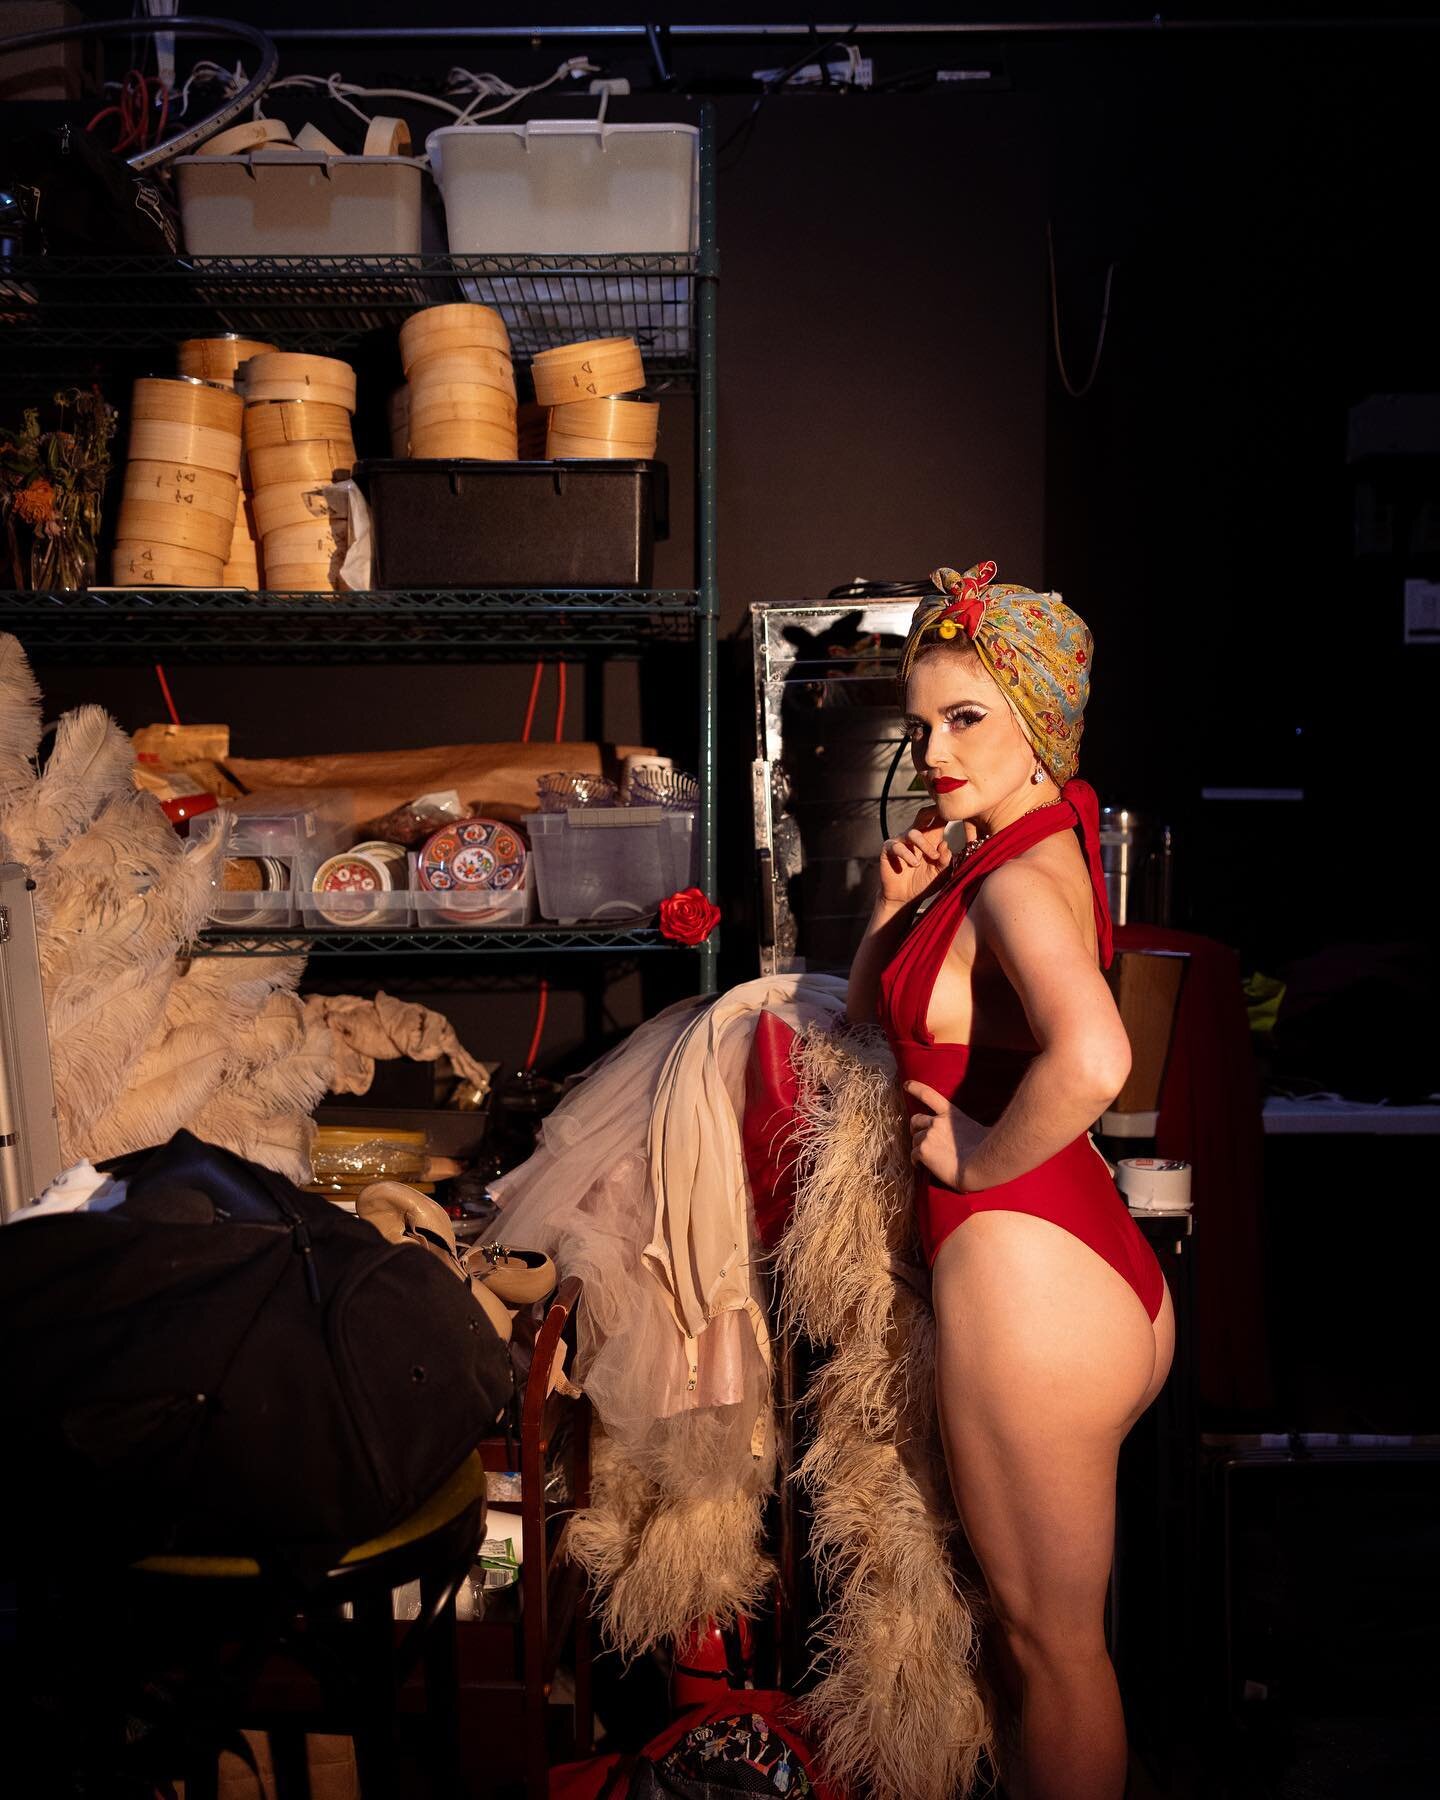 The best photos are always backstage. 💃🏻

Congrats to my cousin Alexandra aka @vitathorne for putting on a successful burlesque show in Brooklyn last week. She's been passionate about this for years and is pursuing with vigor.

What passion project